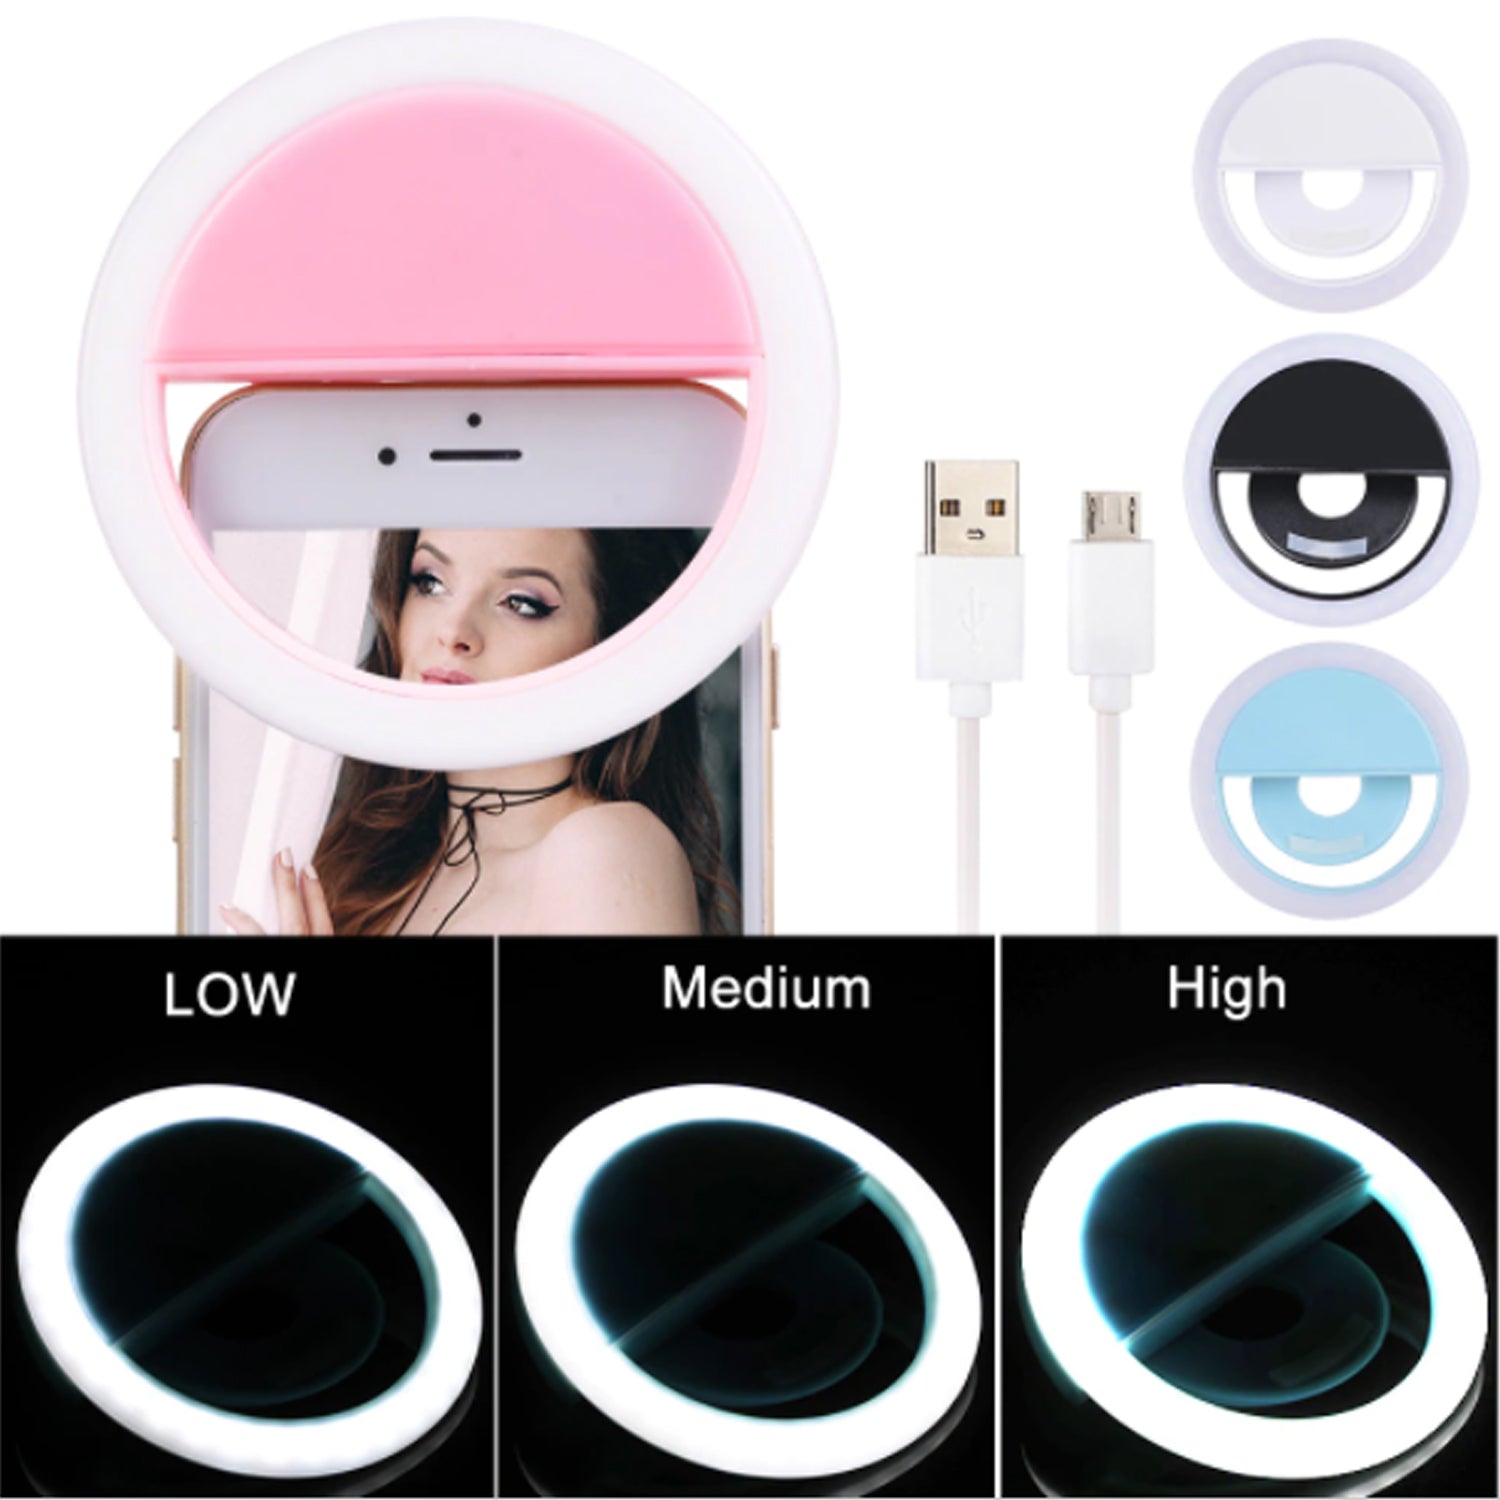 4785 Selfie Ring Light used for applying bright shade over face during taking selfies and making videos etc.